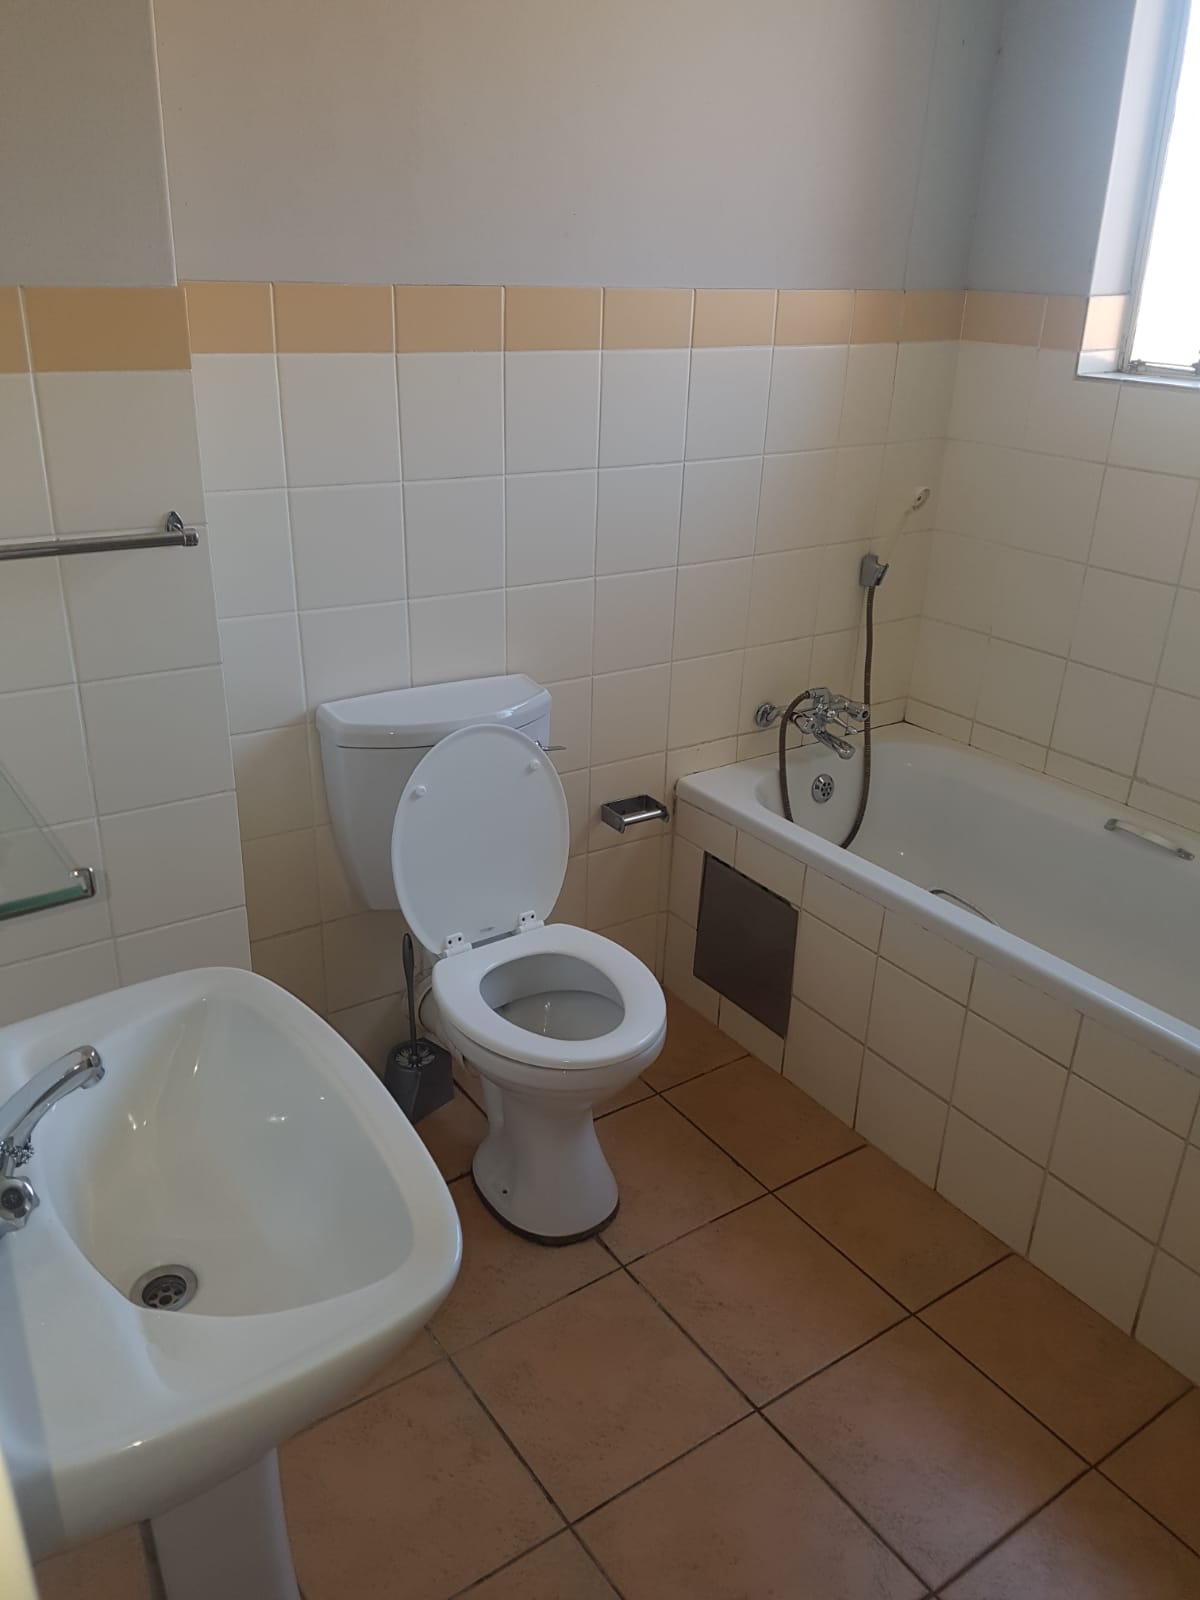 BACHELOR APARTMENT FOR RENT IN SILVERLAKES PRETORIA EAST